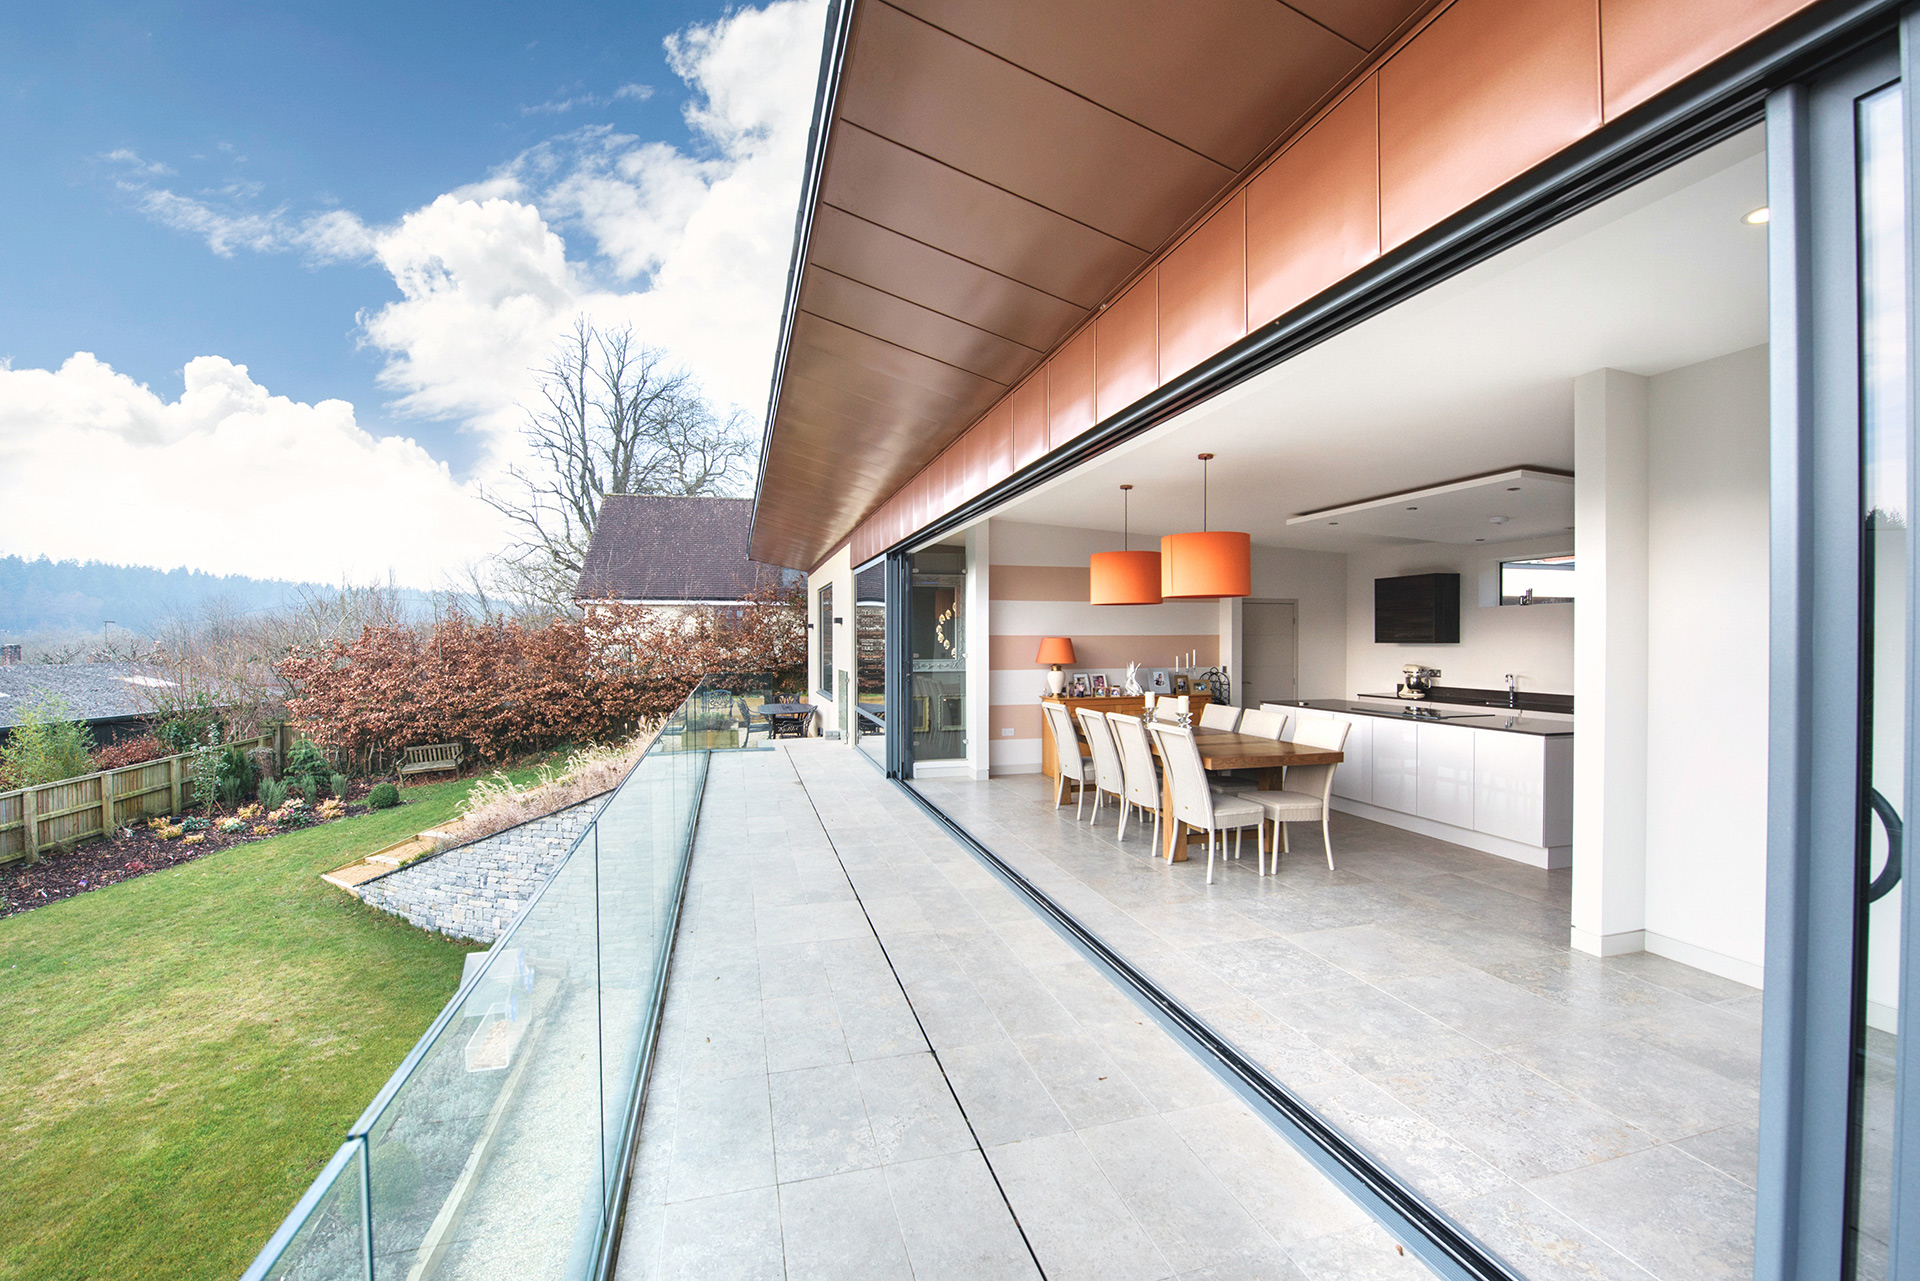 balcony view of house and garden with large sliding doors and copper cladding